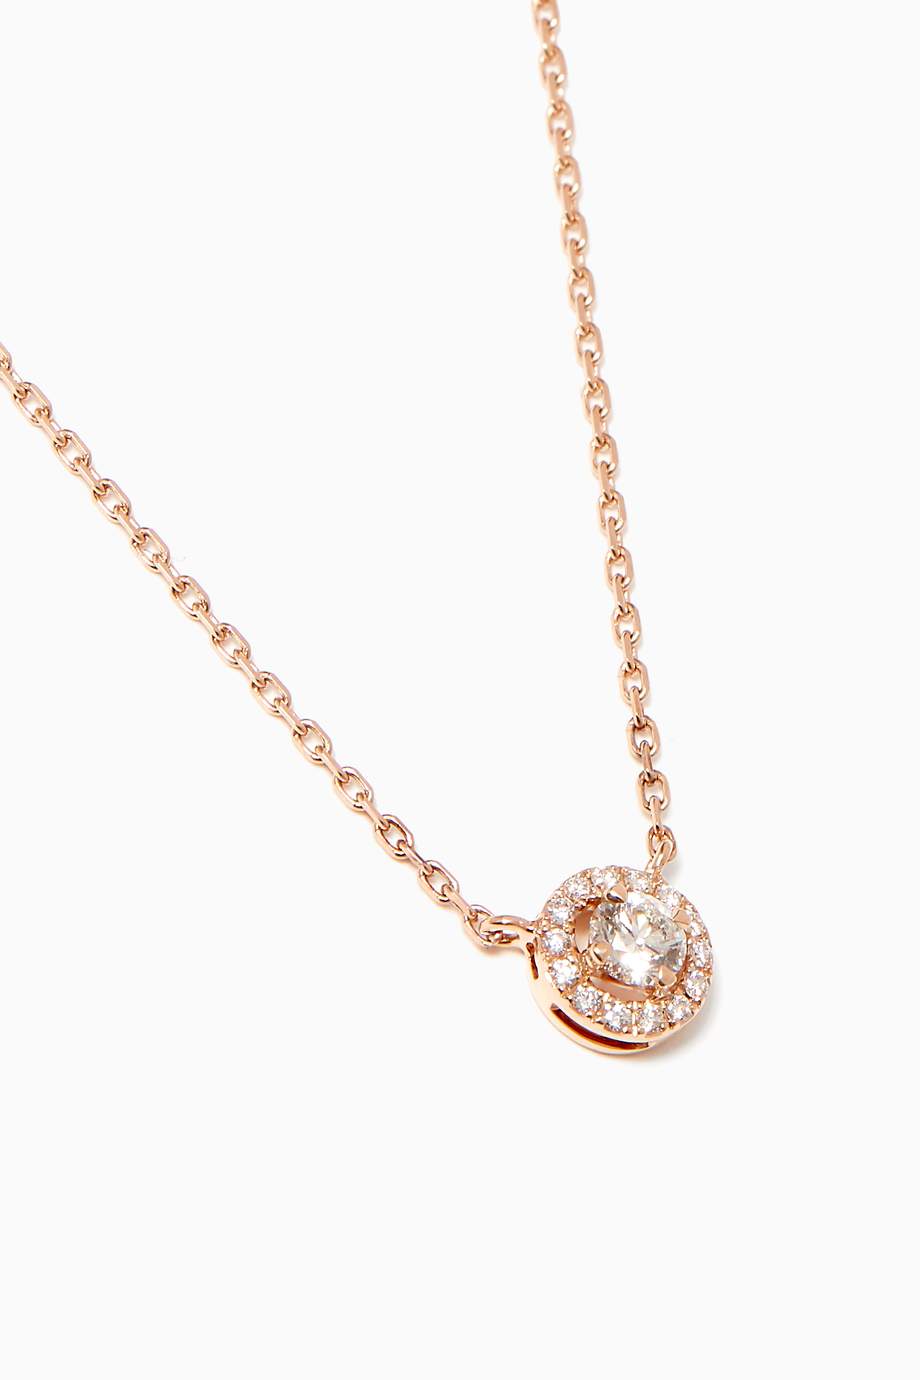 Shop Marli Rose Gold Rock Round Diamond Chain Necklace for Women ...